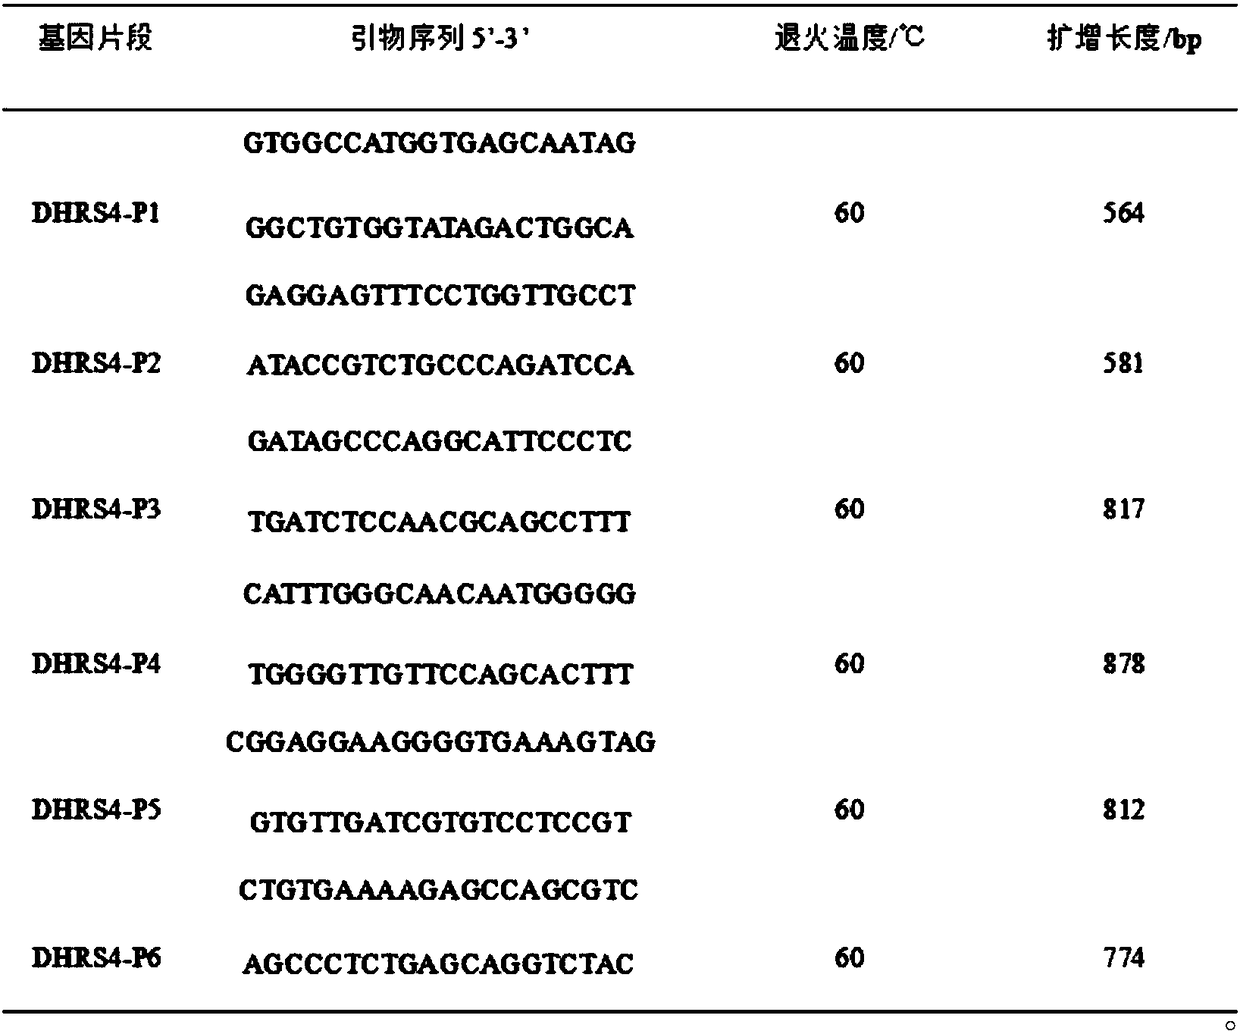 SNP molecular marker relevant to growth traits of large white pig and application of SNP molecular marker